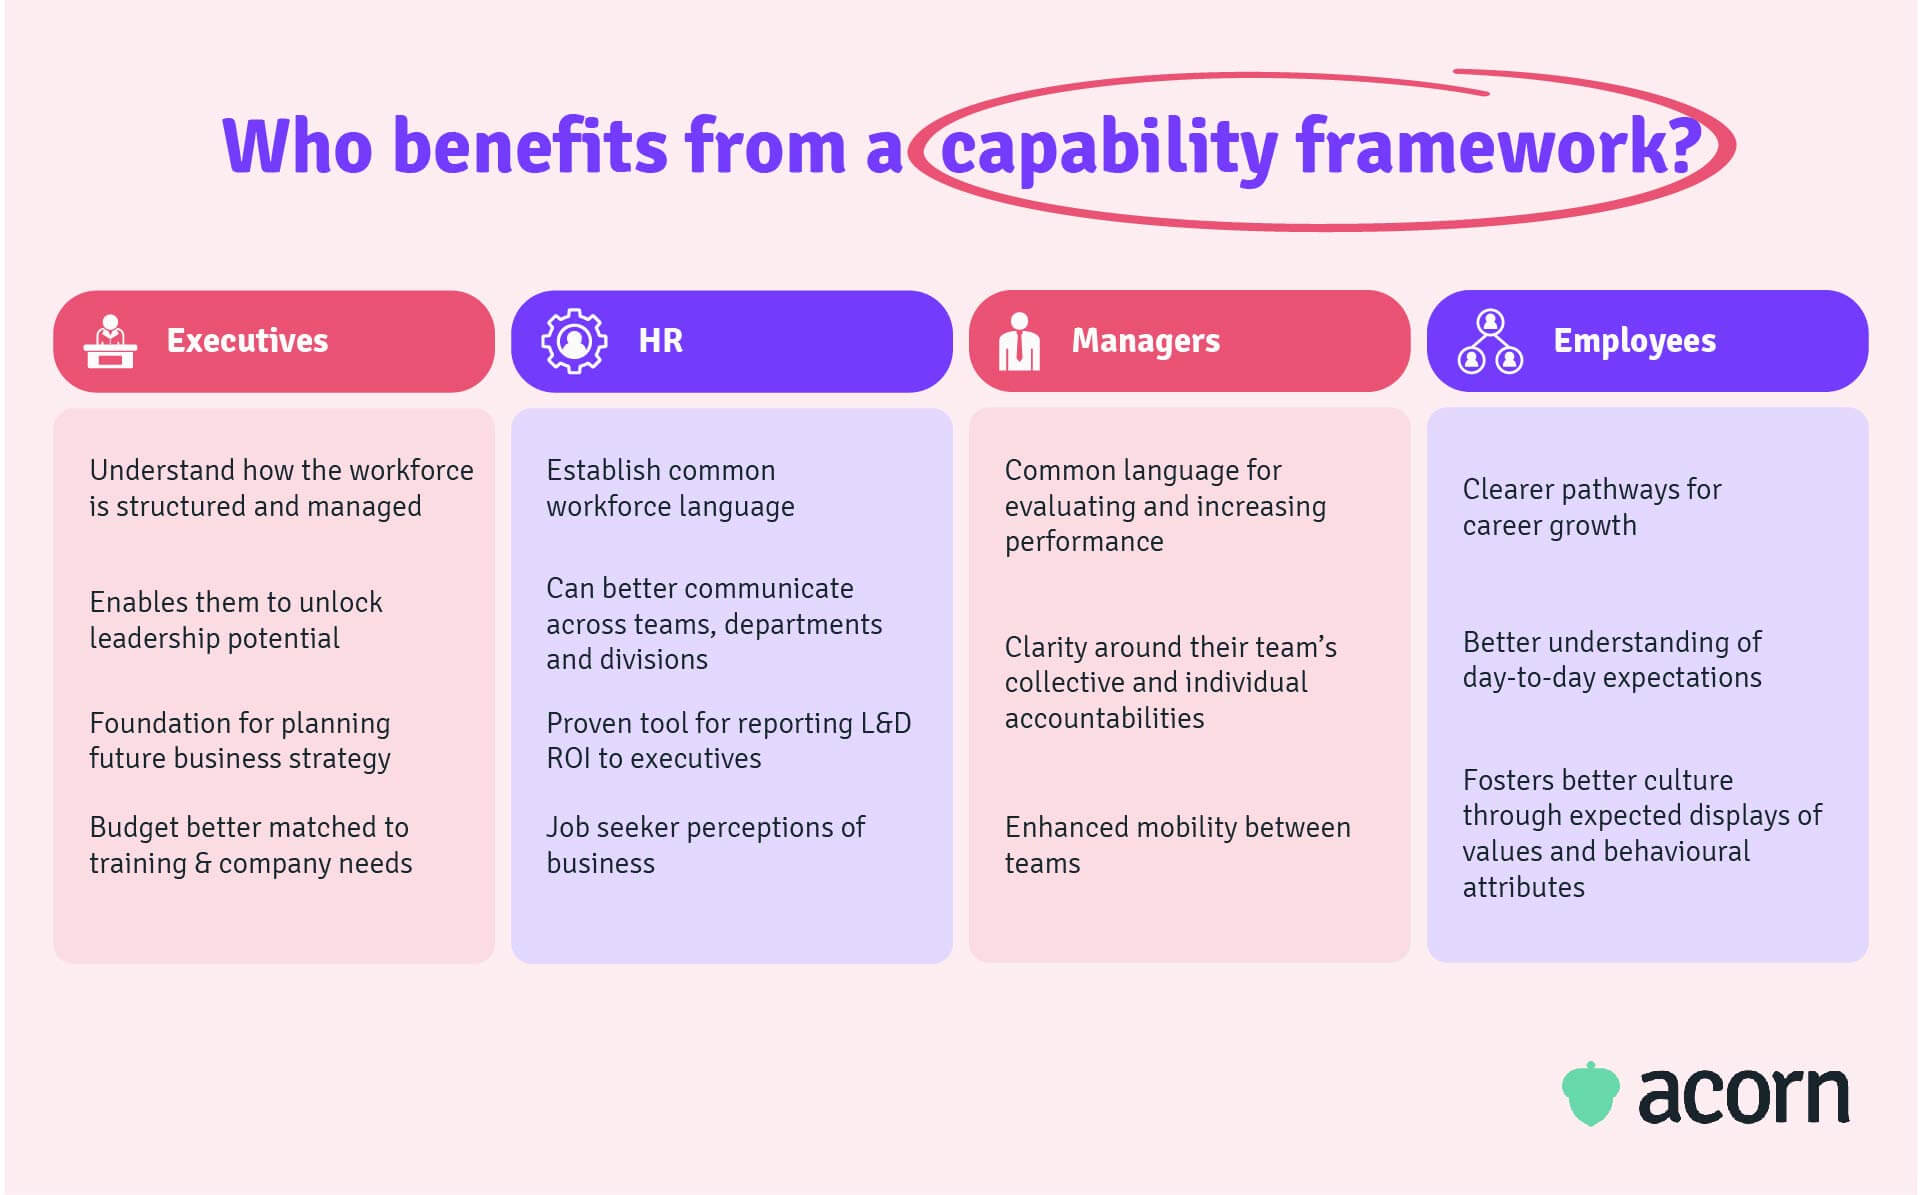 Table showing how capability training can be derived from employee needs